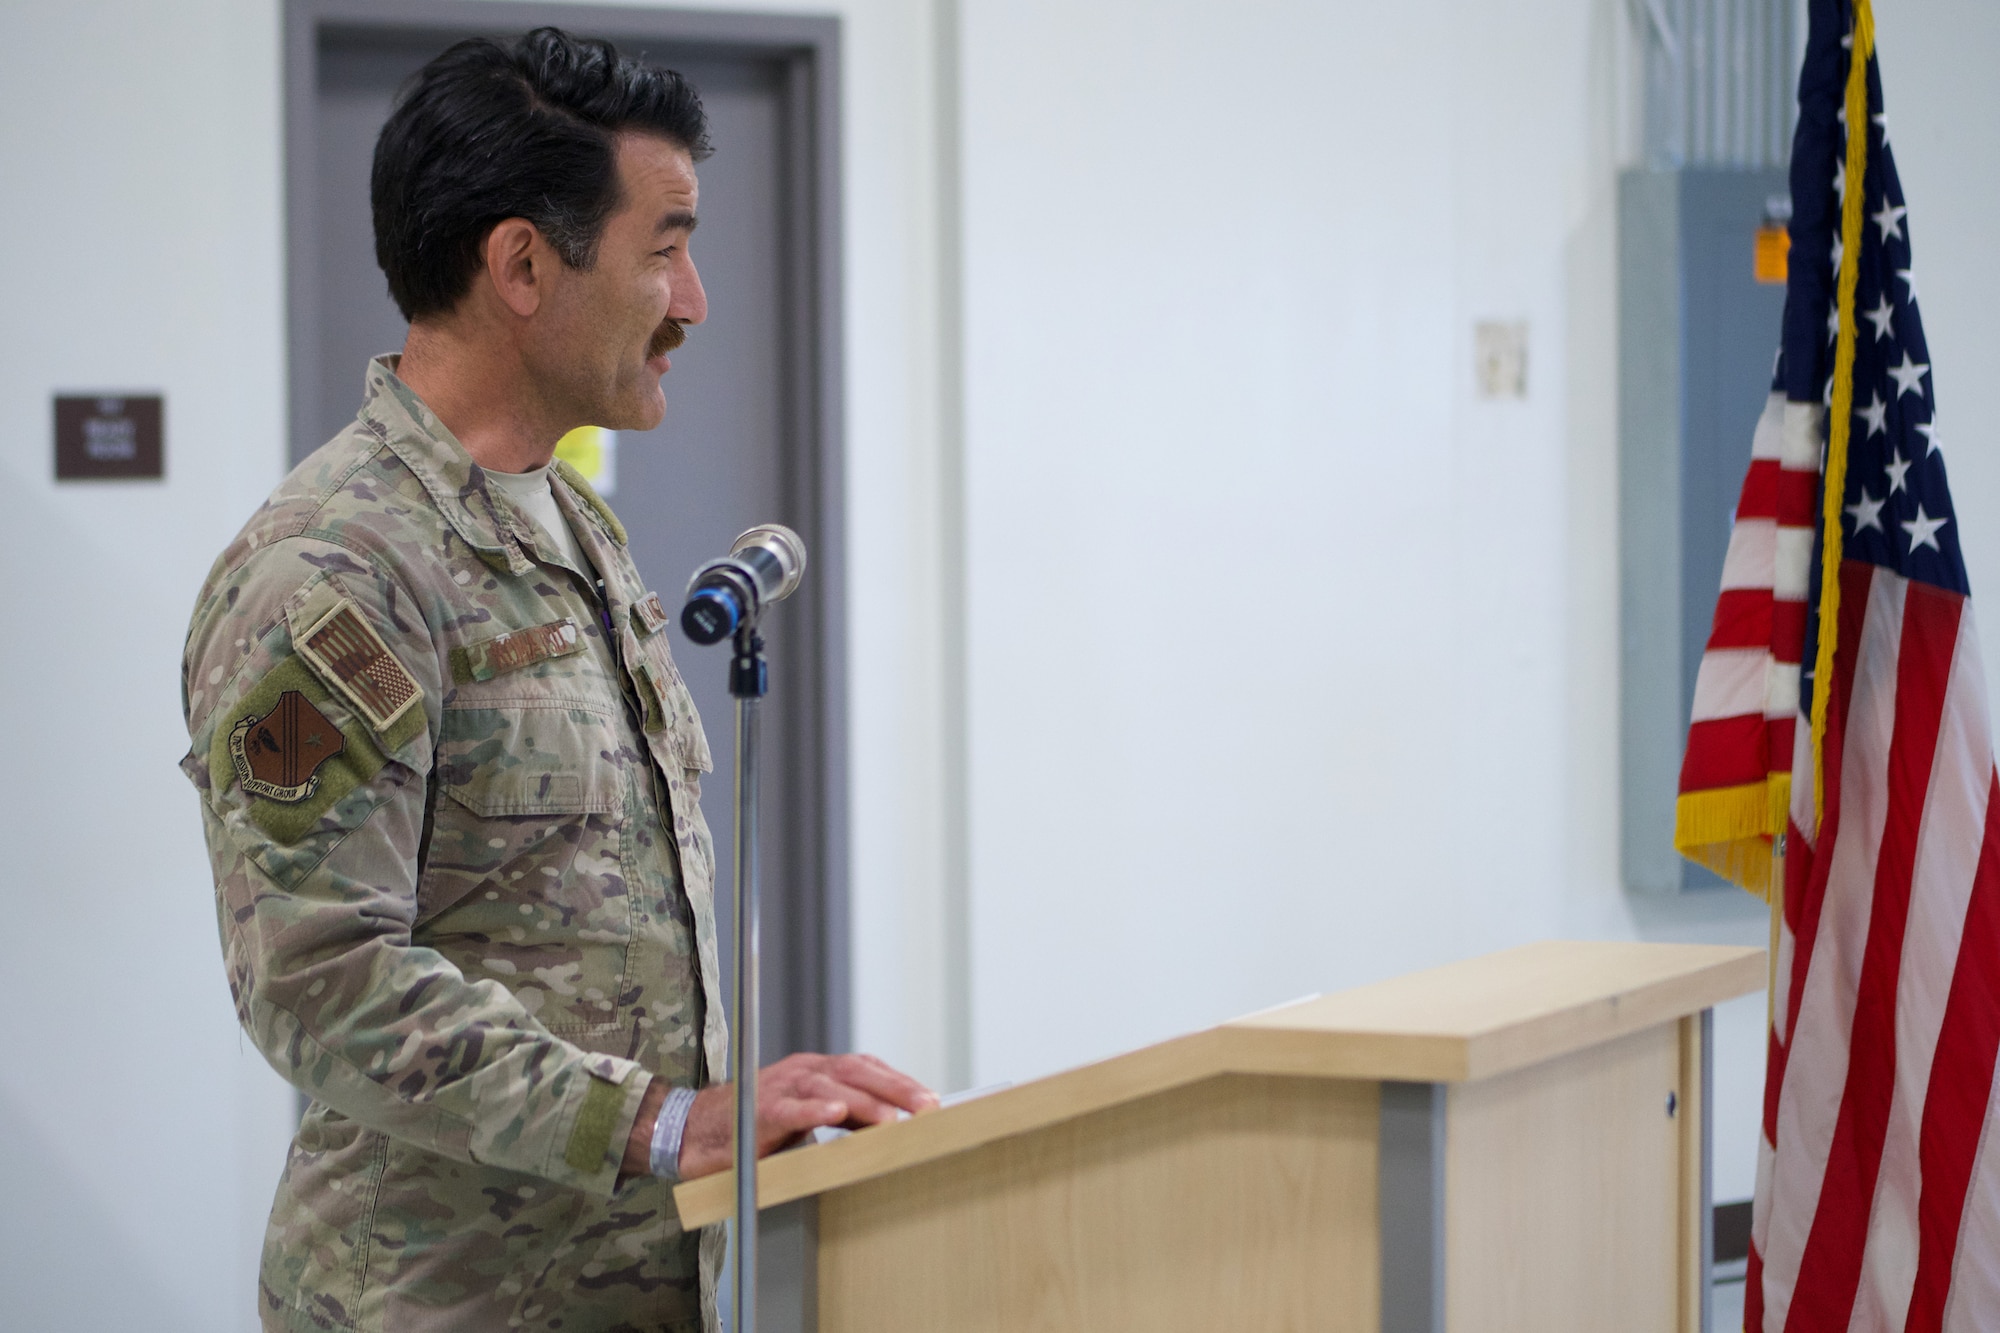 Col. Matthew Komatsu succeeds Col. Keolani Bailey as 176th Mission Support Group commander